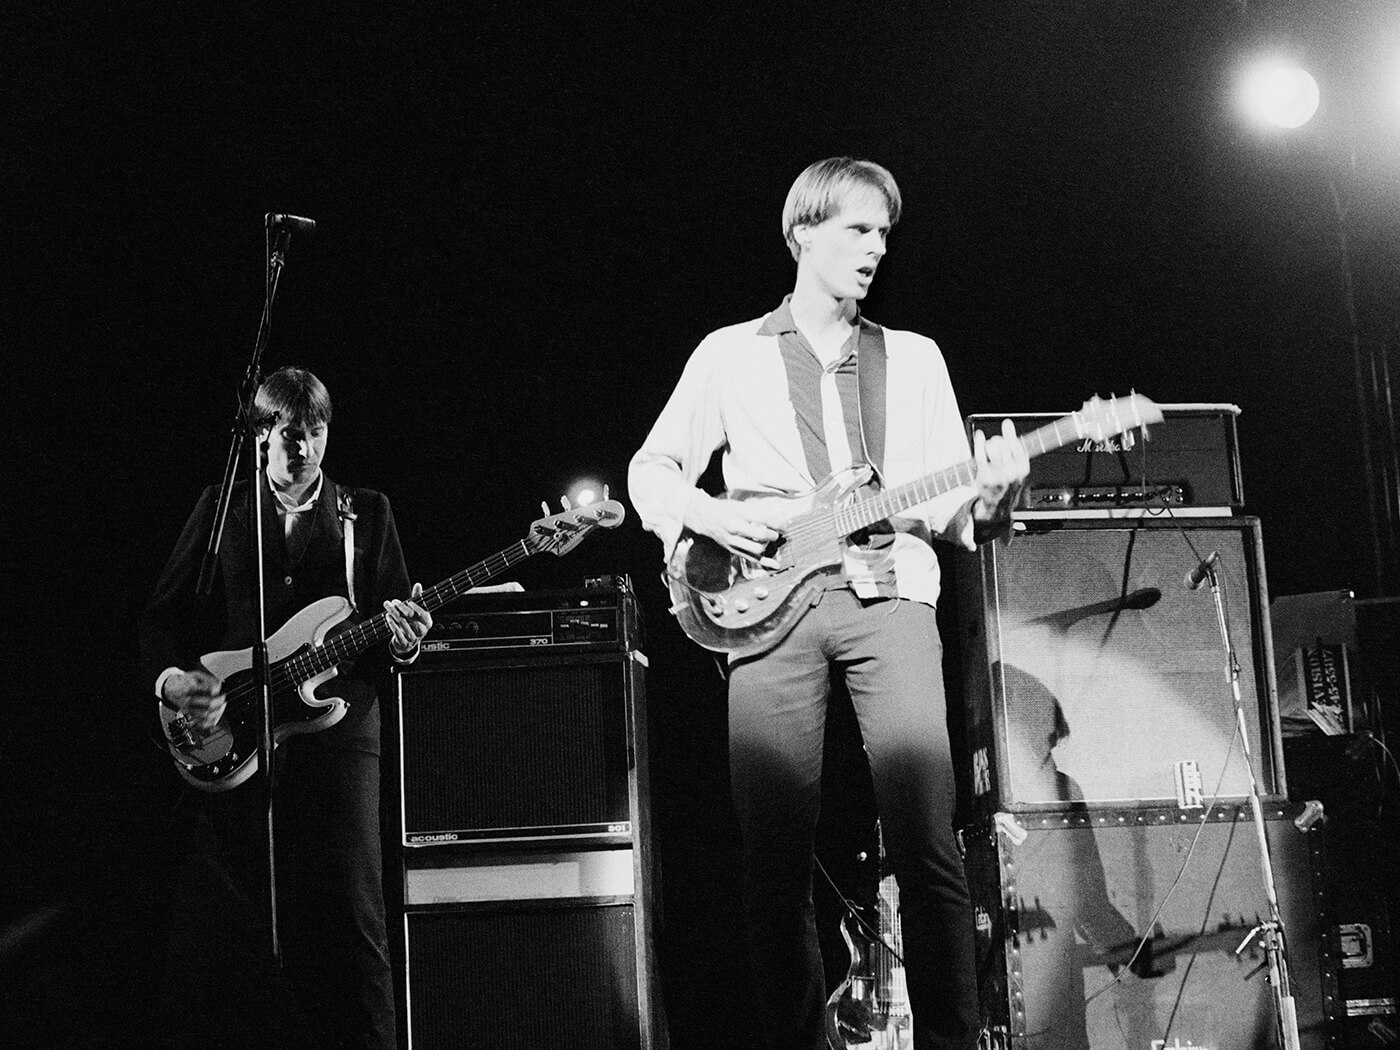 Television's Fred Smith and Tom Verlaine